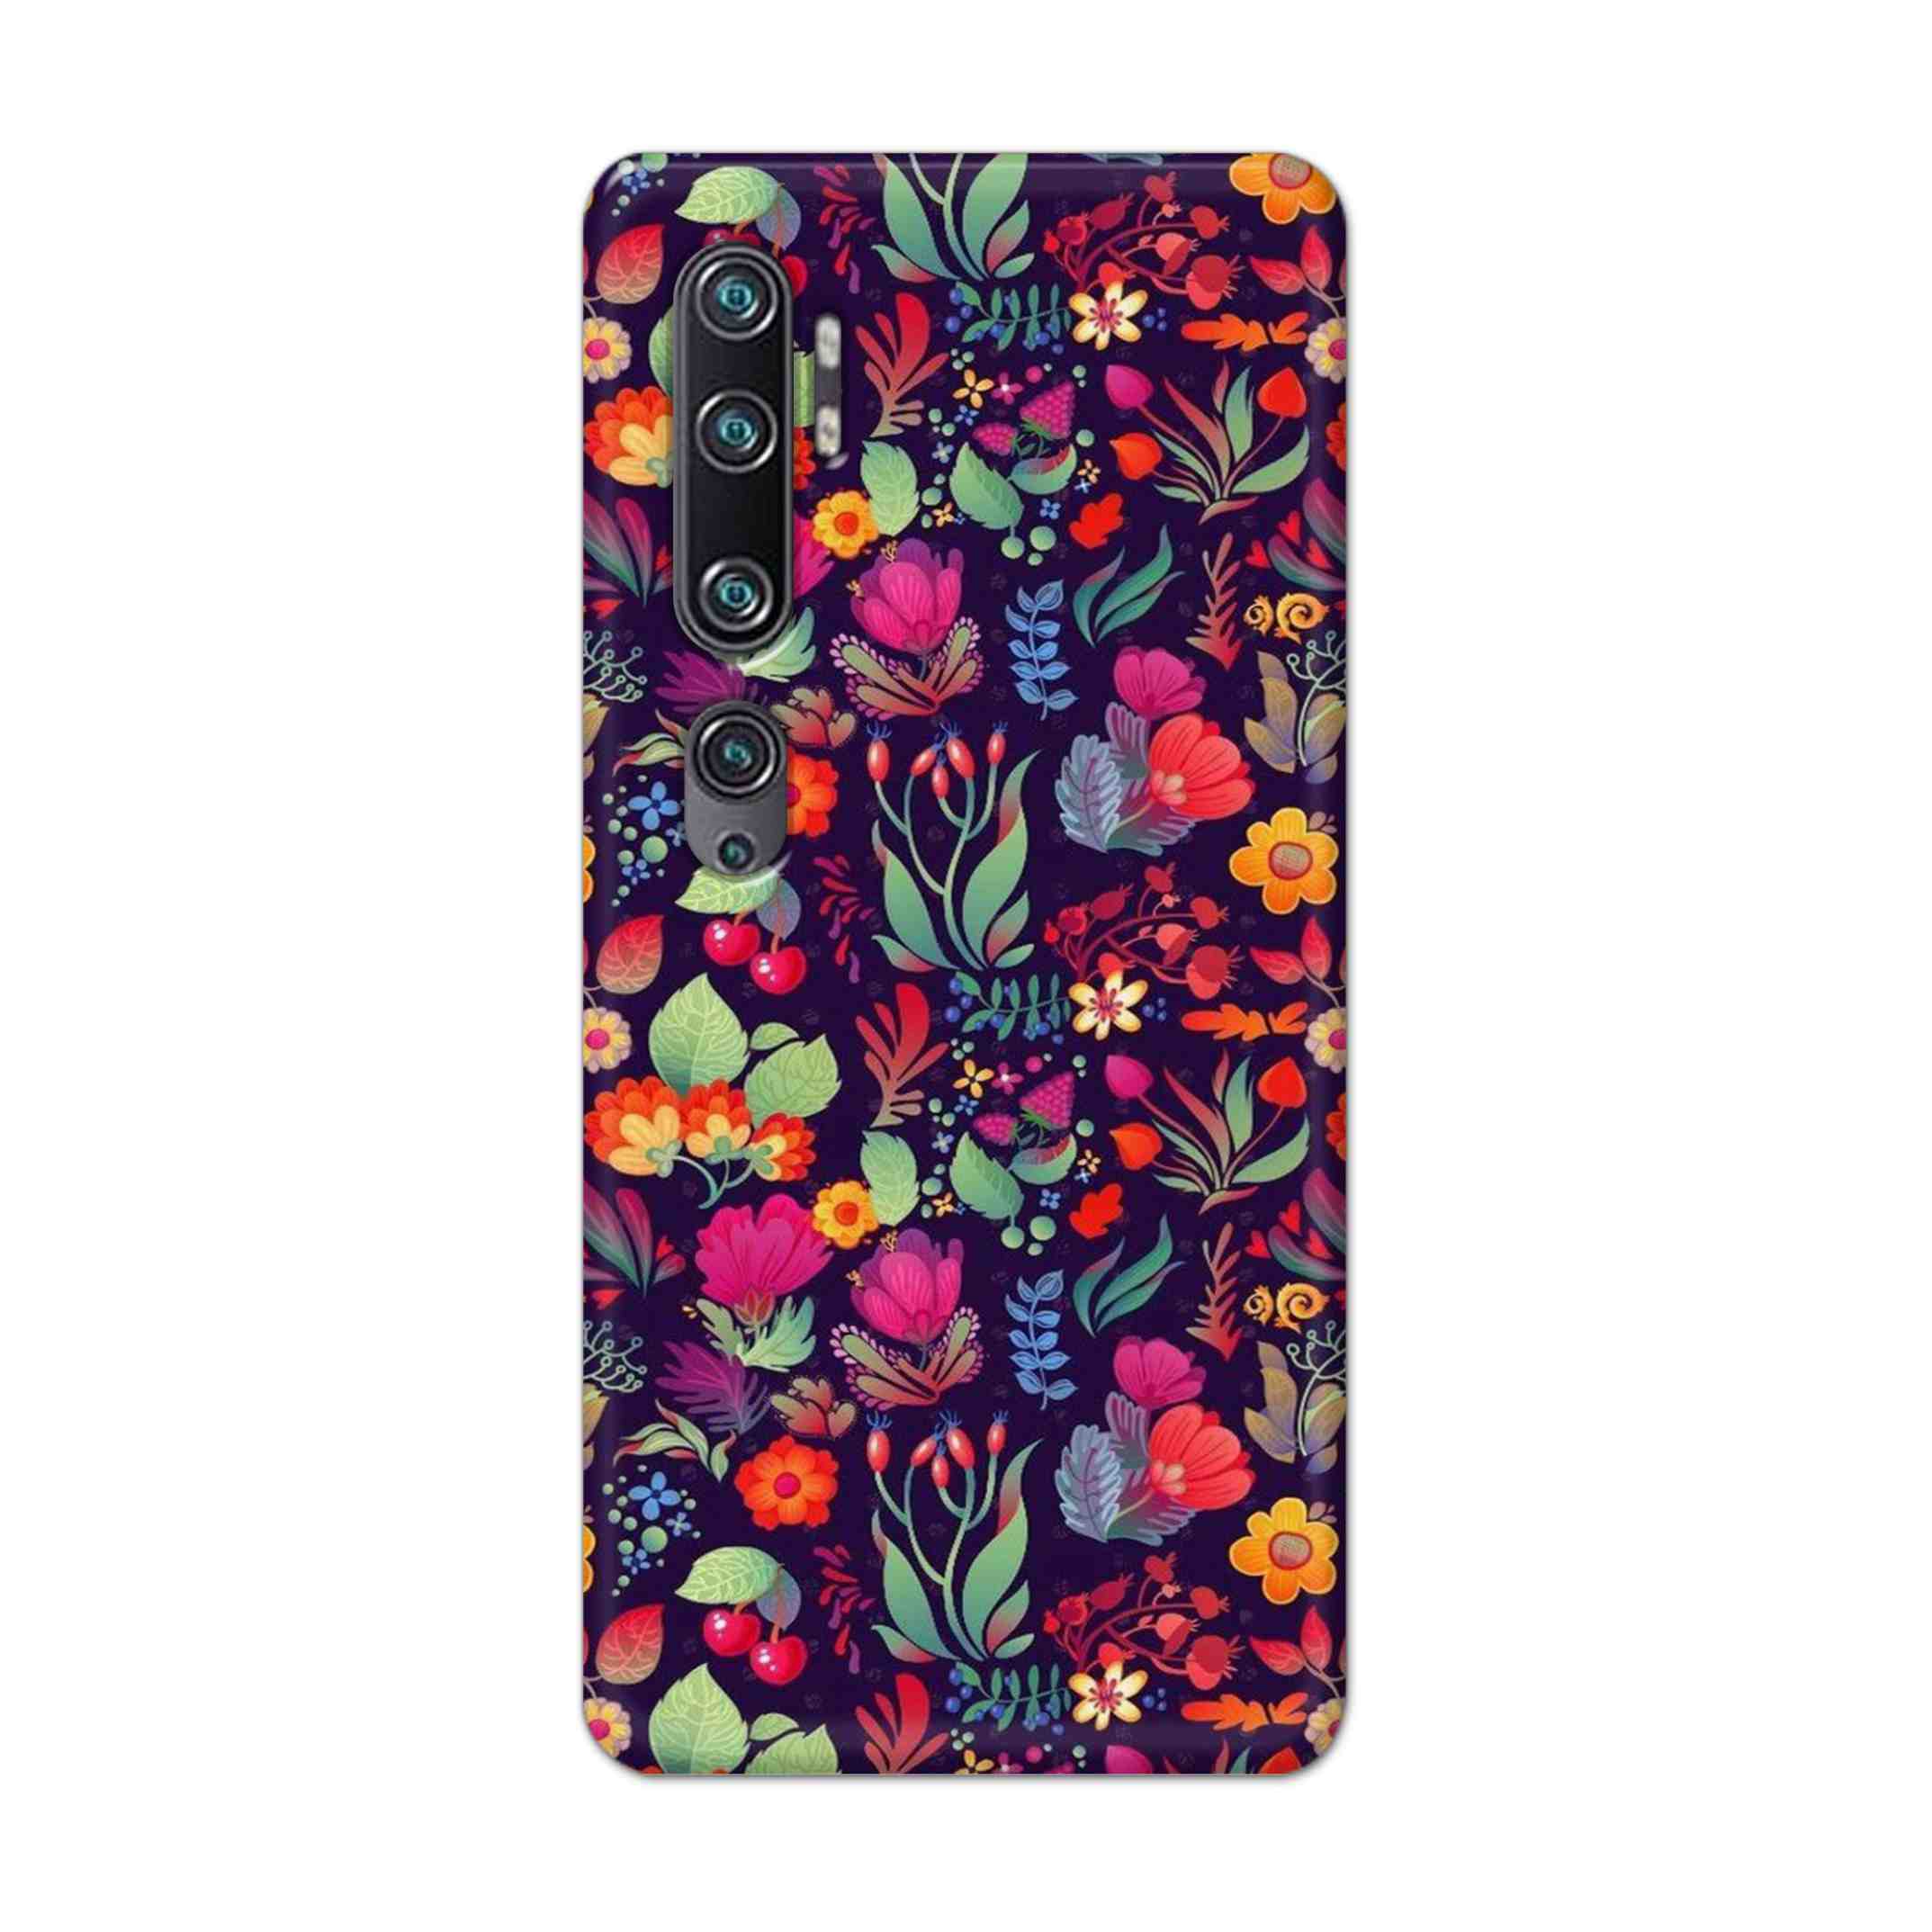 Buy Fruits Flower Hard Back Mobile Phone Case Cover For Xiaomi Mi Note 10 Online